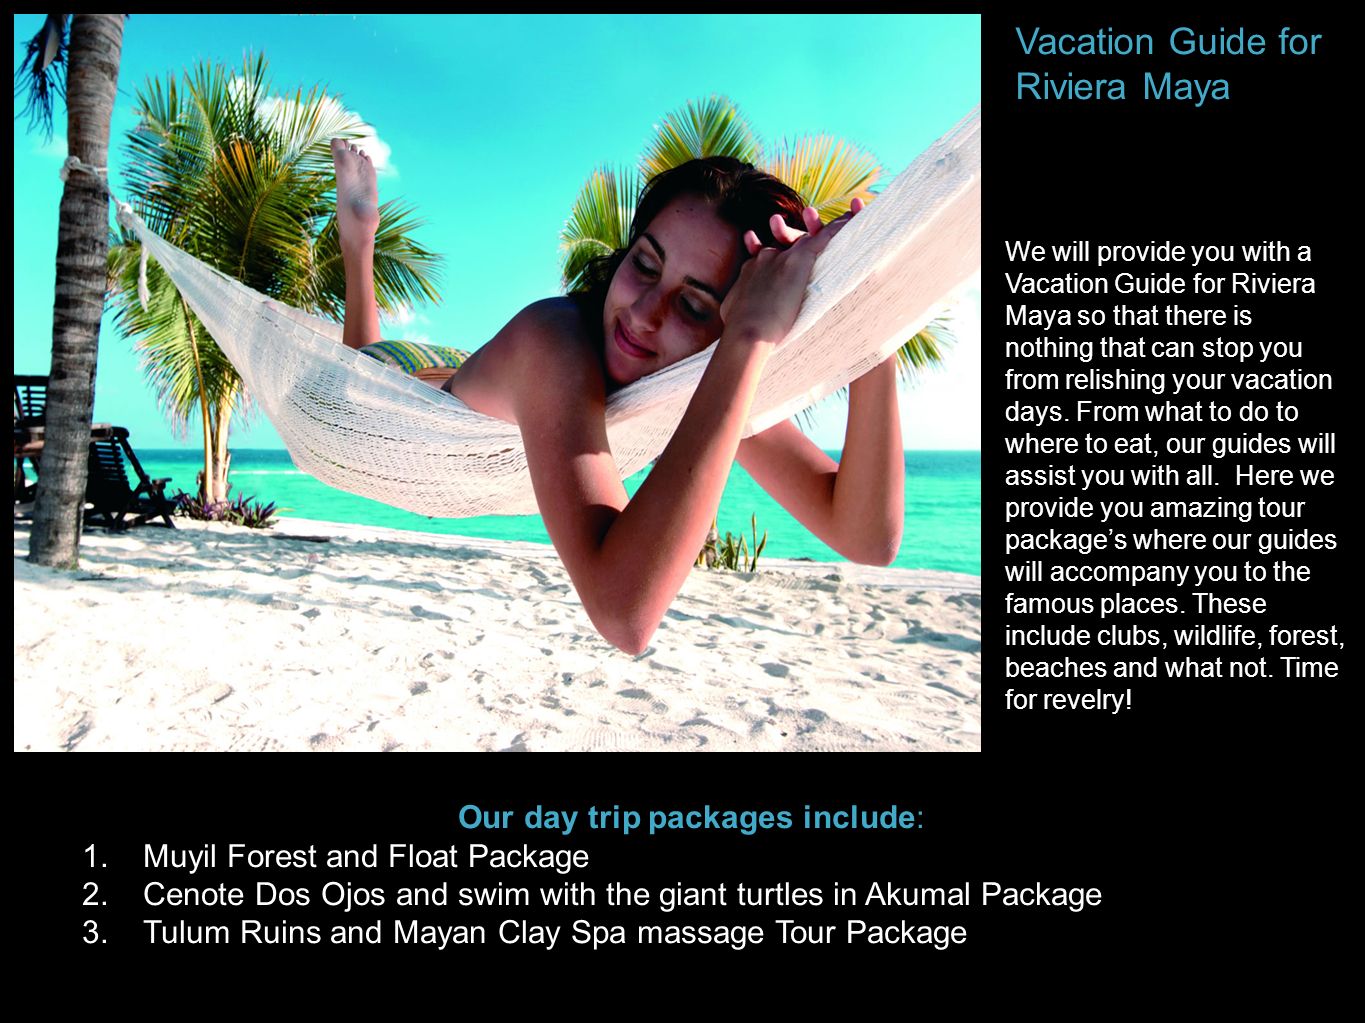 Vacation Guide for Riviera Maya We will provide you with a Vacation Guide for Riviera Maya so that there is nothing that can stop you from relishing your vacation days.